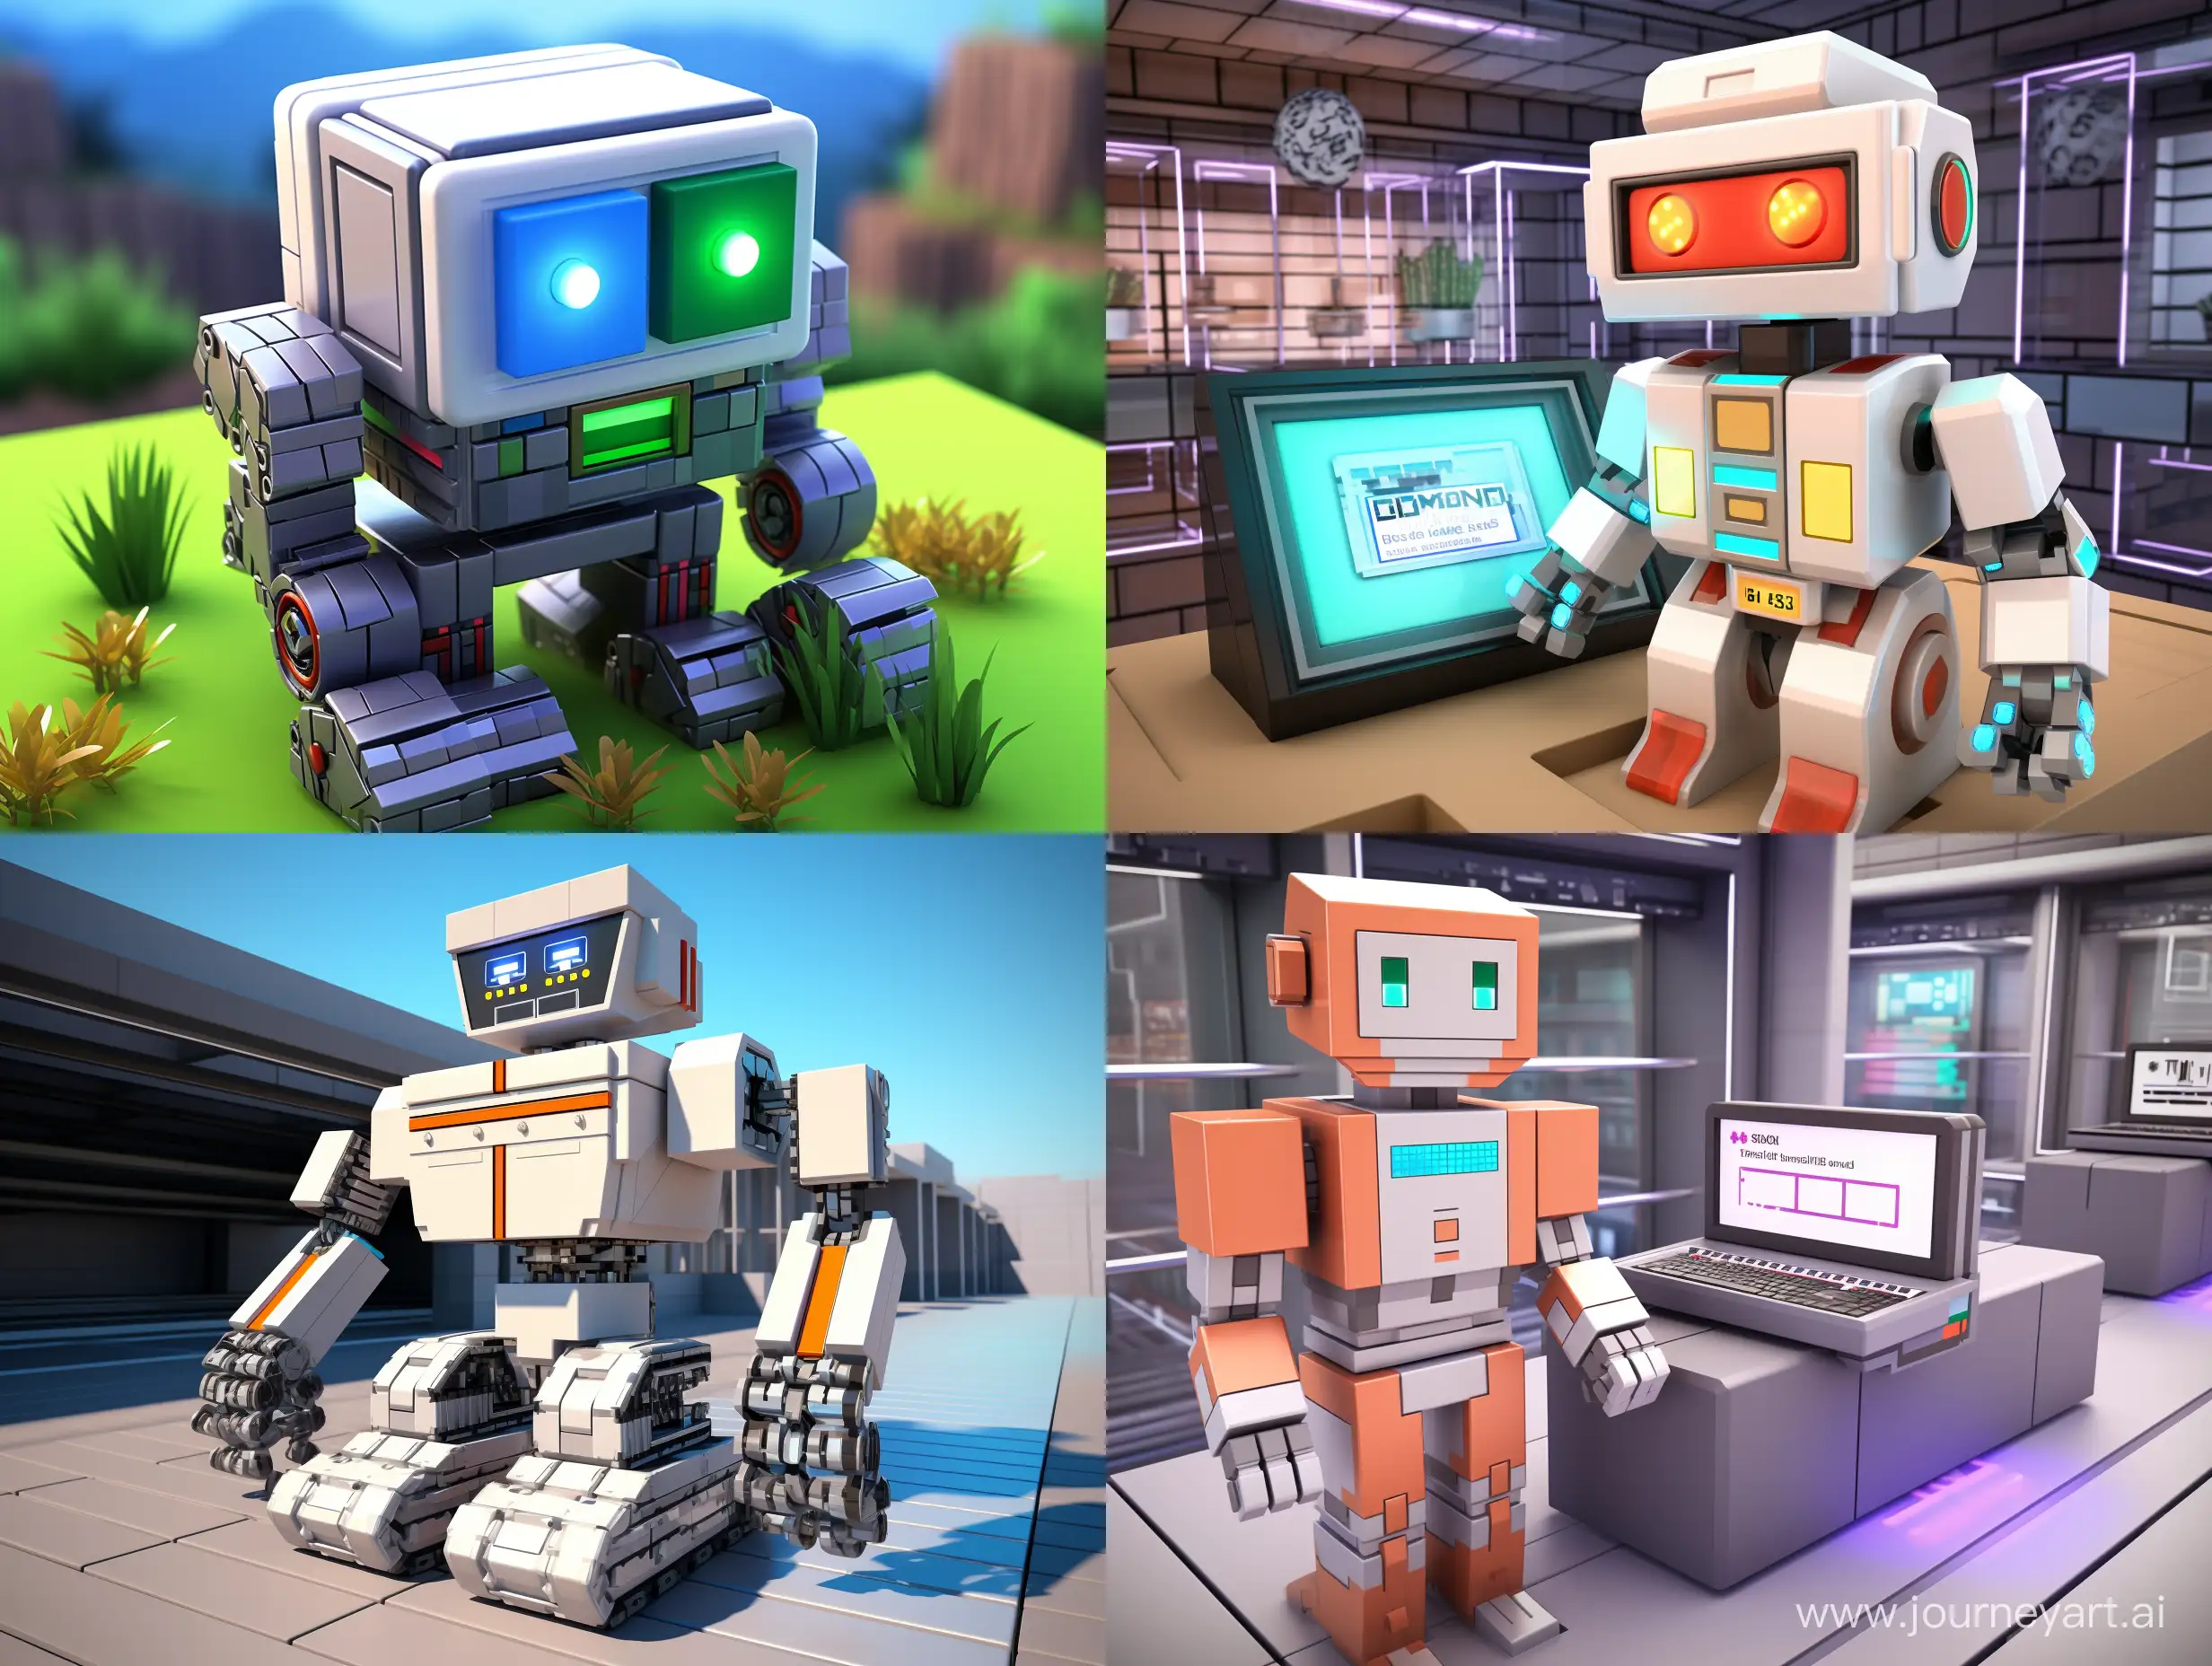 AIPowered-Minecraft-Robot-Showcases-Building-Skills-with-Blocks